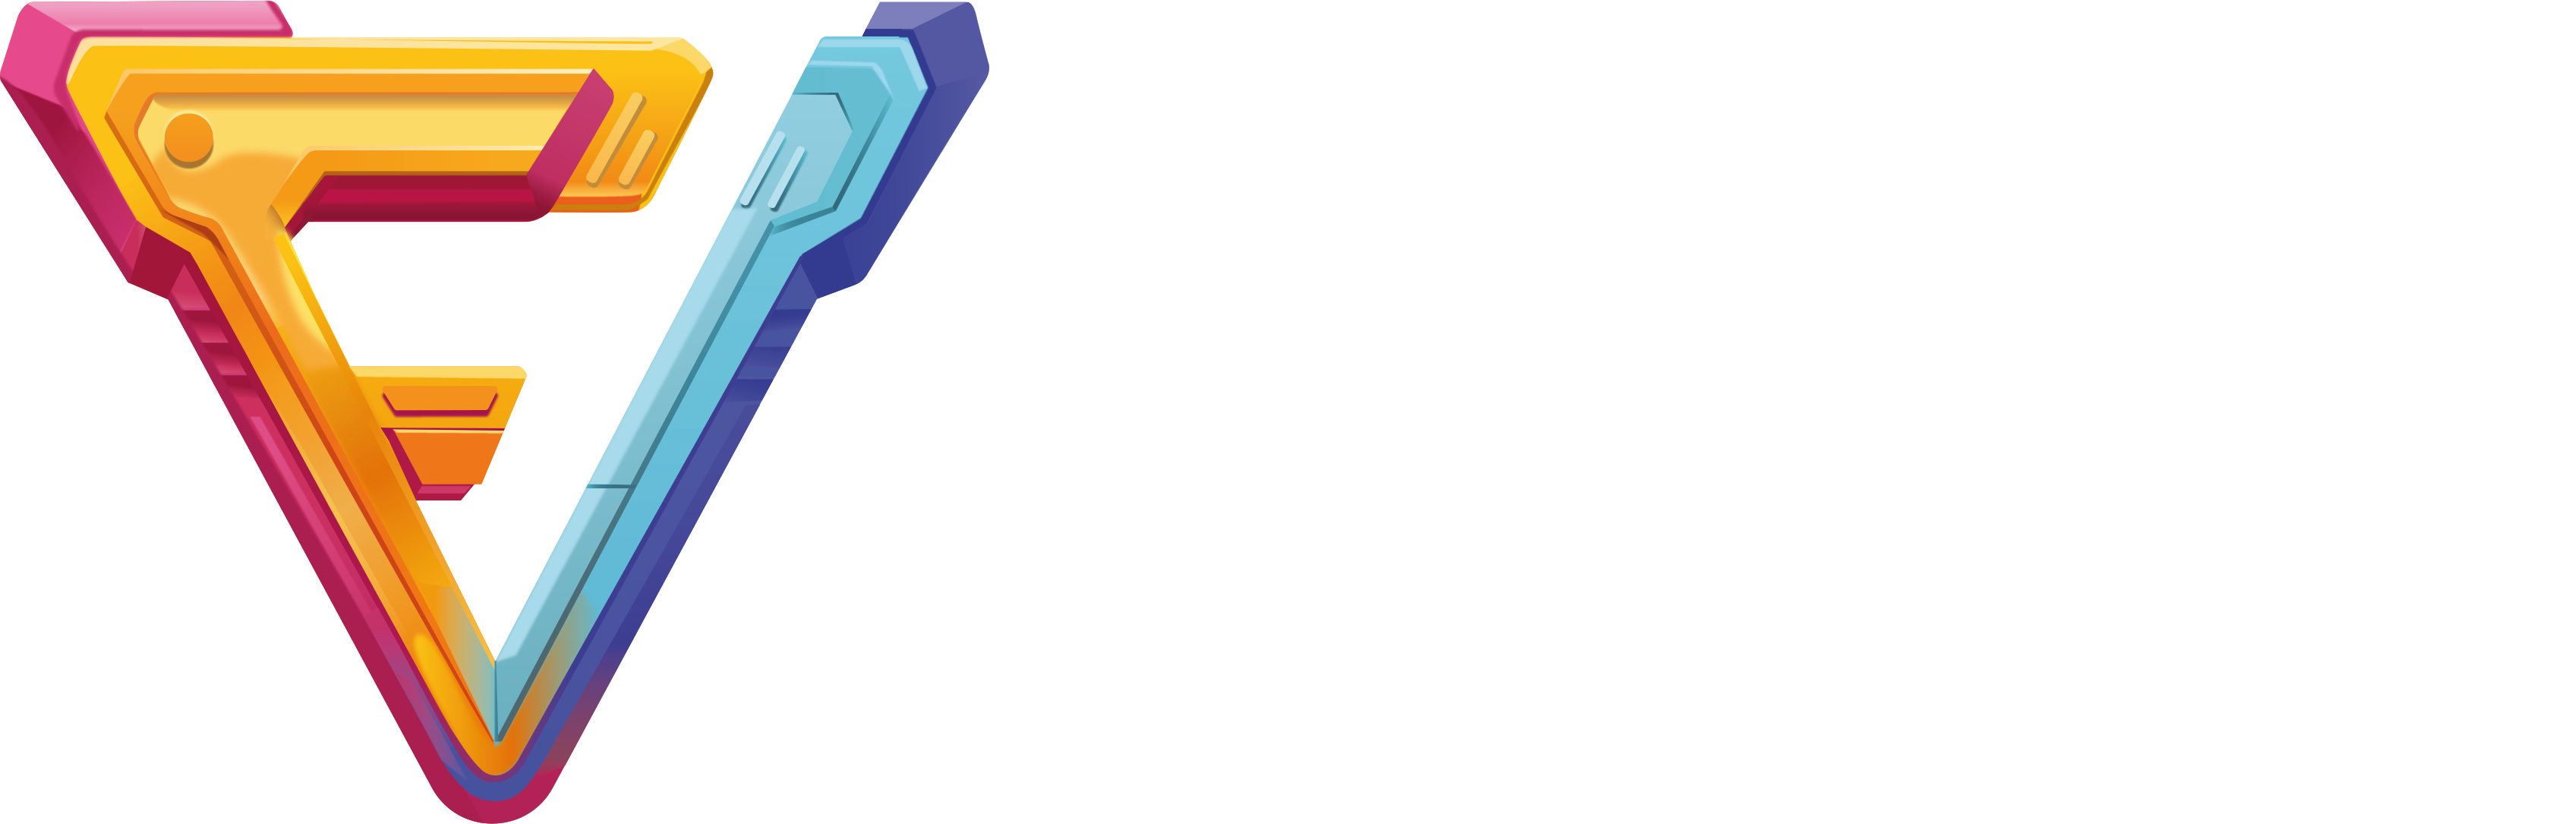 Funverse Games